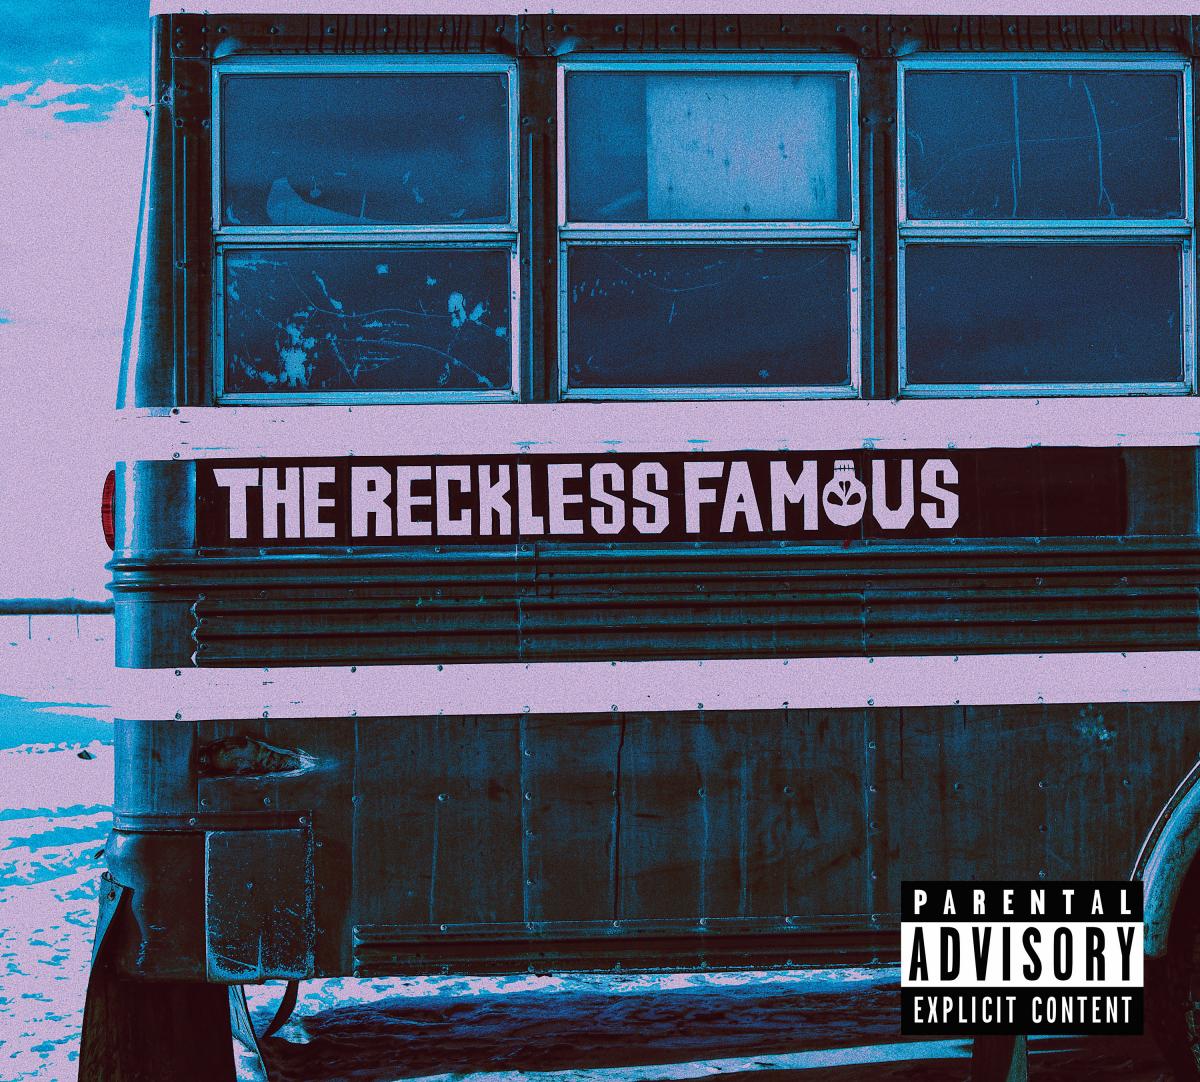 The Reckless Famous